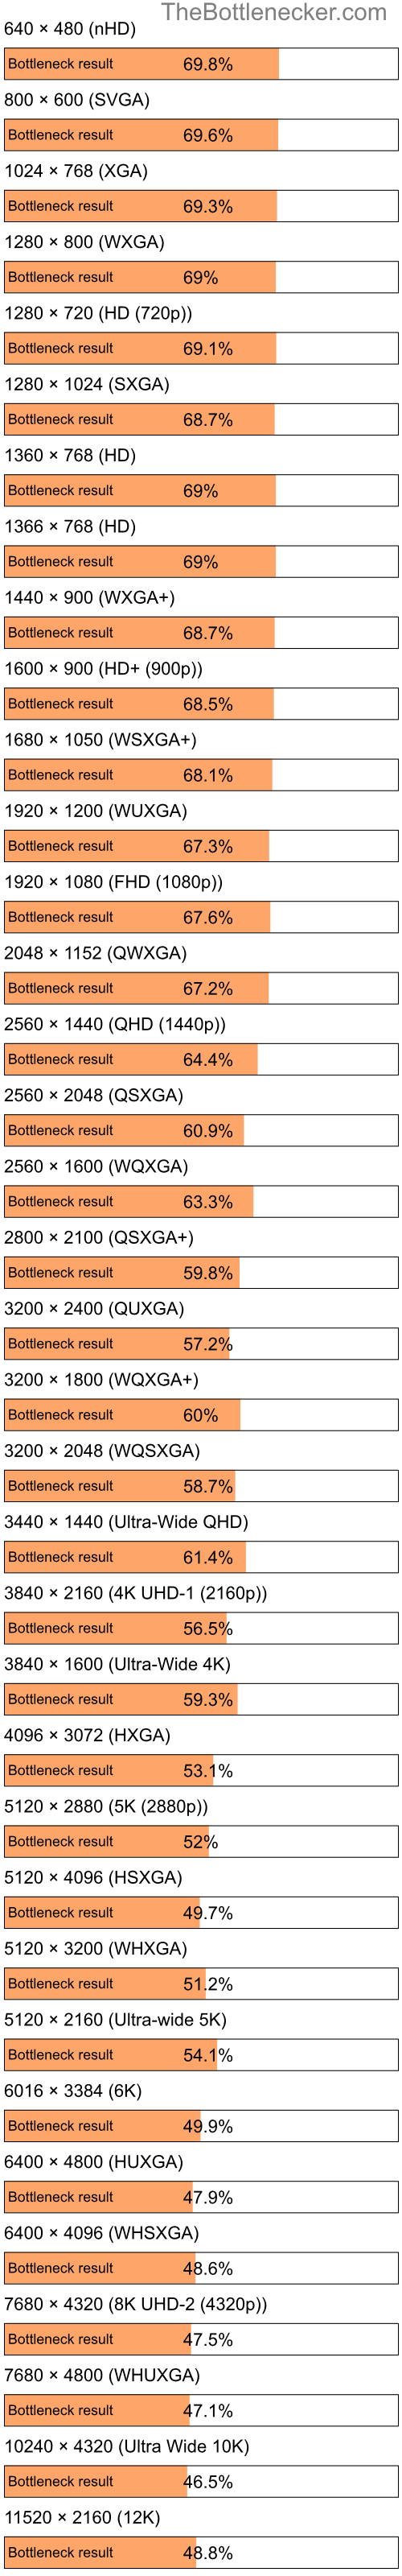 Bottleneck results by resolution for AMD Phenom II X4 973 and NVIDIA GeForce RTX 4060 in General Tasks